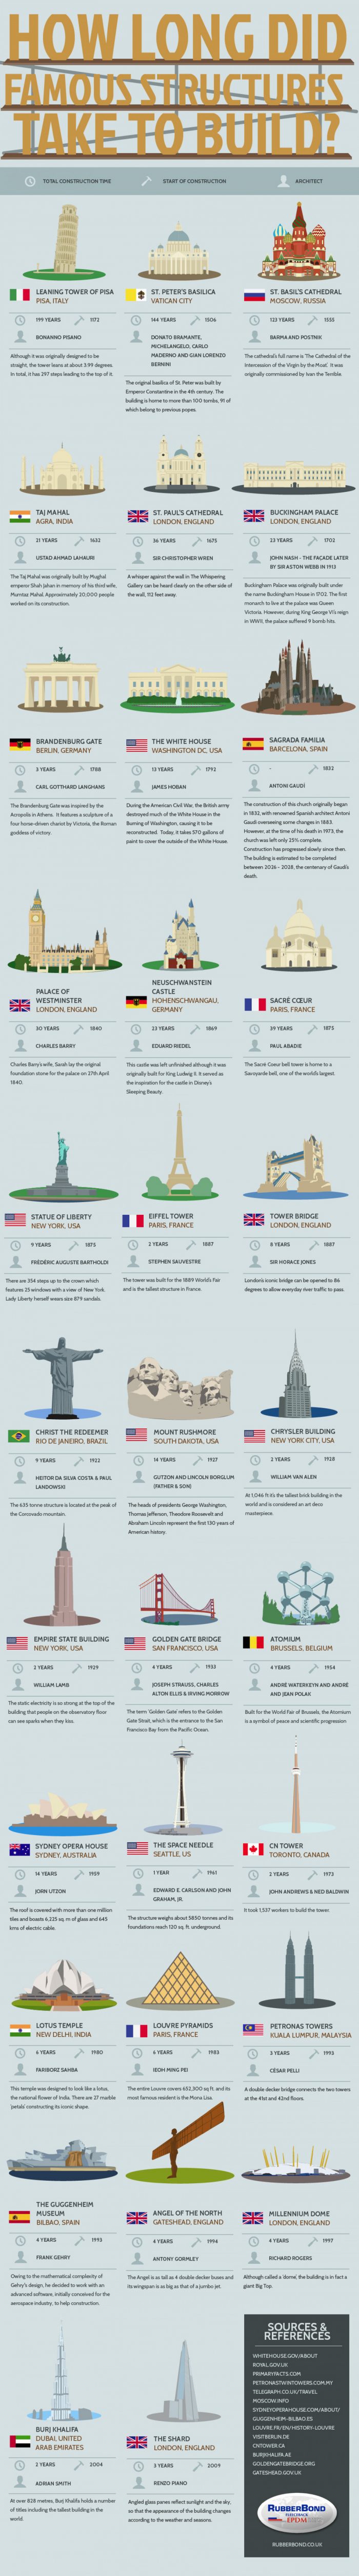 length of time for famous structures to be built